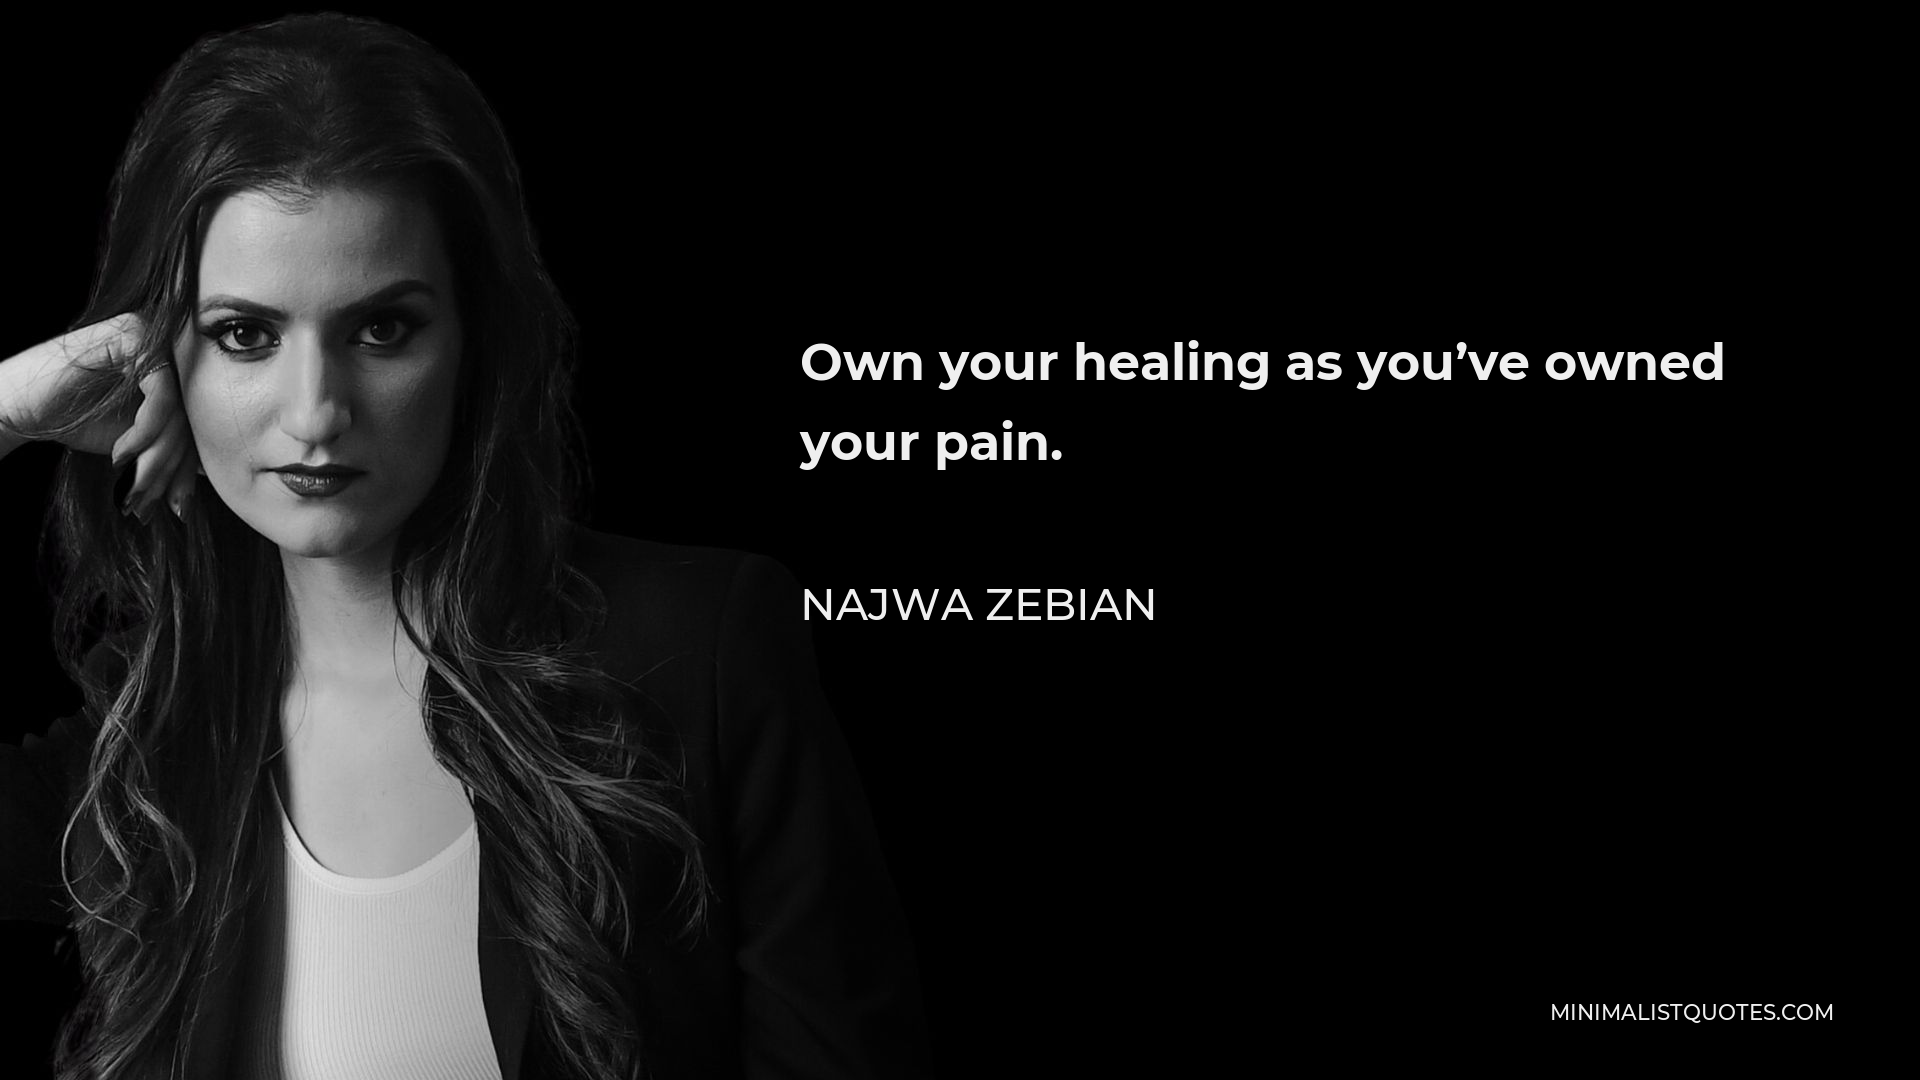 Najwa Zebian Quote - Own your healing as you’ve owned your pain.